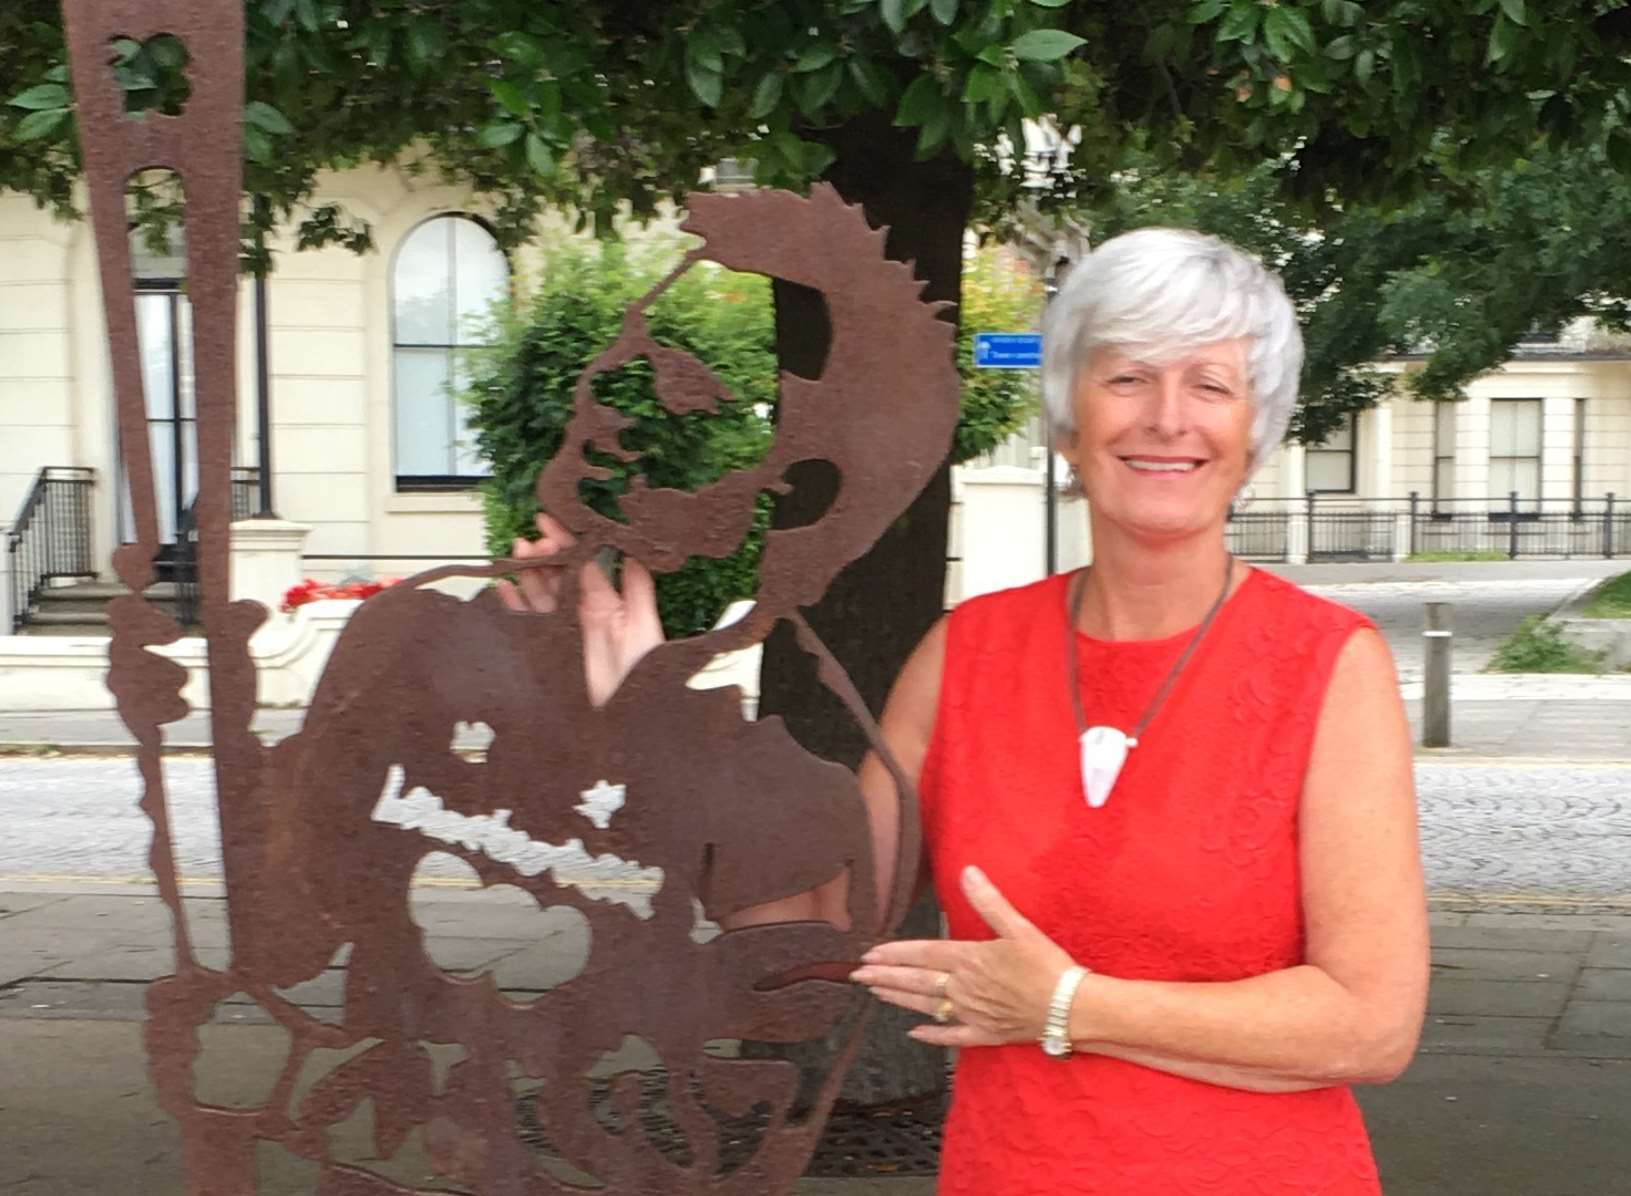 Chairman of Pegasus Playscheme Sue Clark with her son's statue on Dover seafront